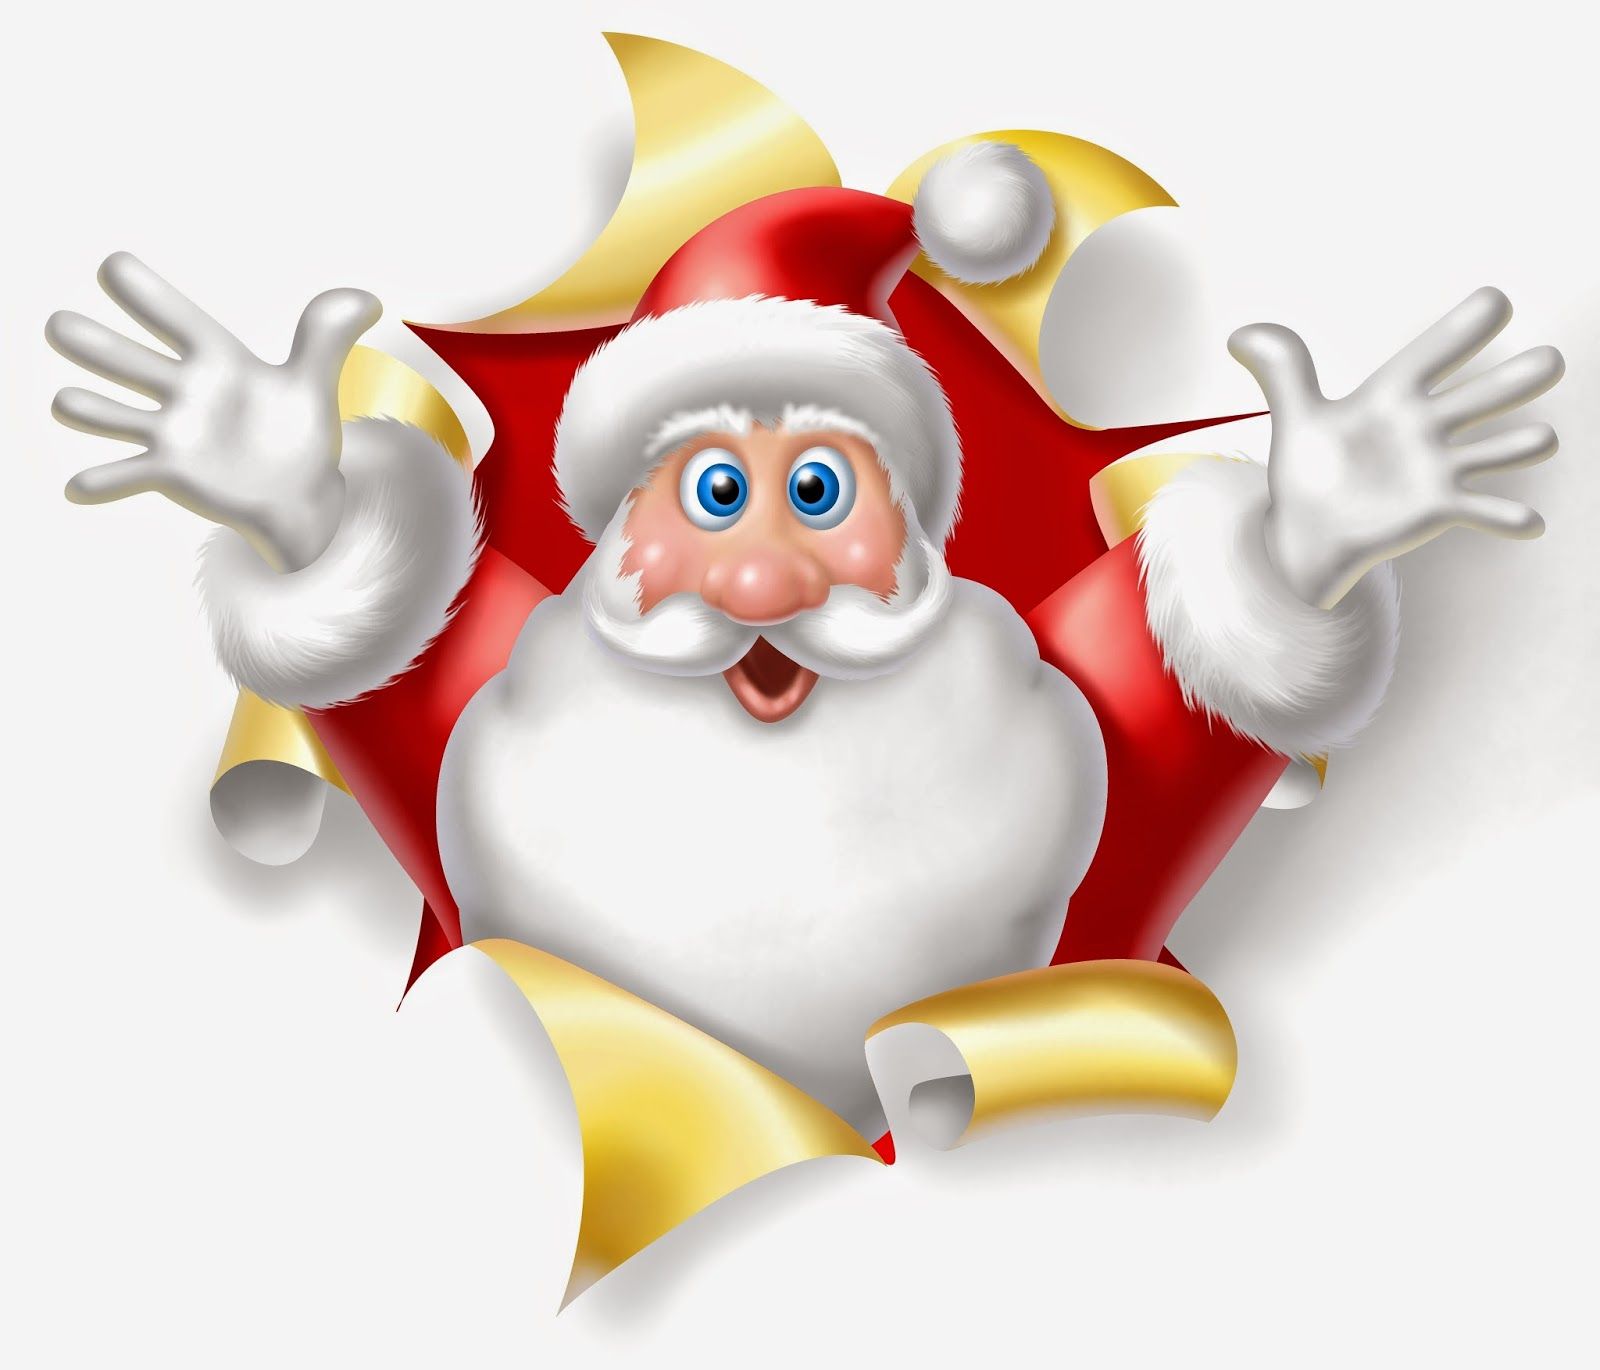 Funny Santa Claus Cartoon picture Christmas image for facebook